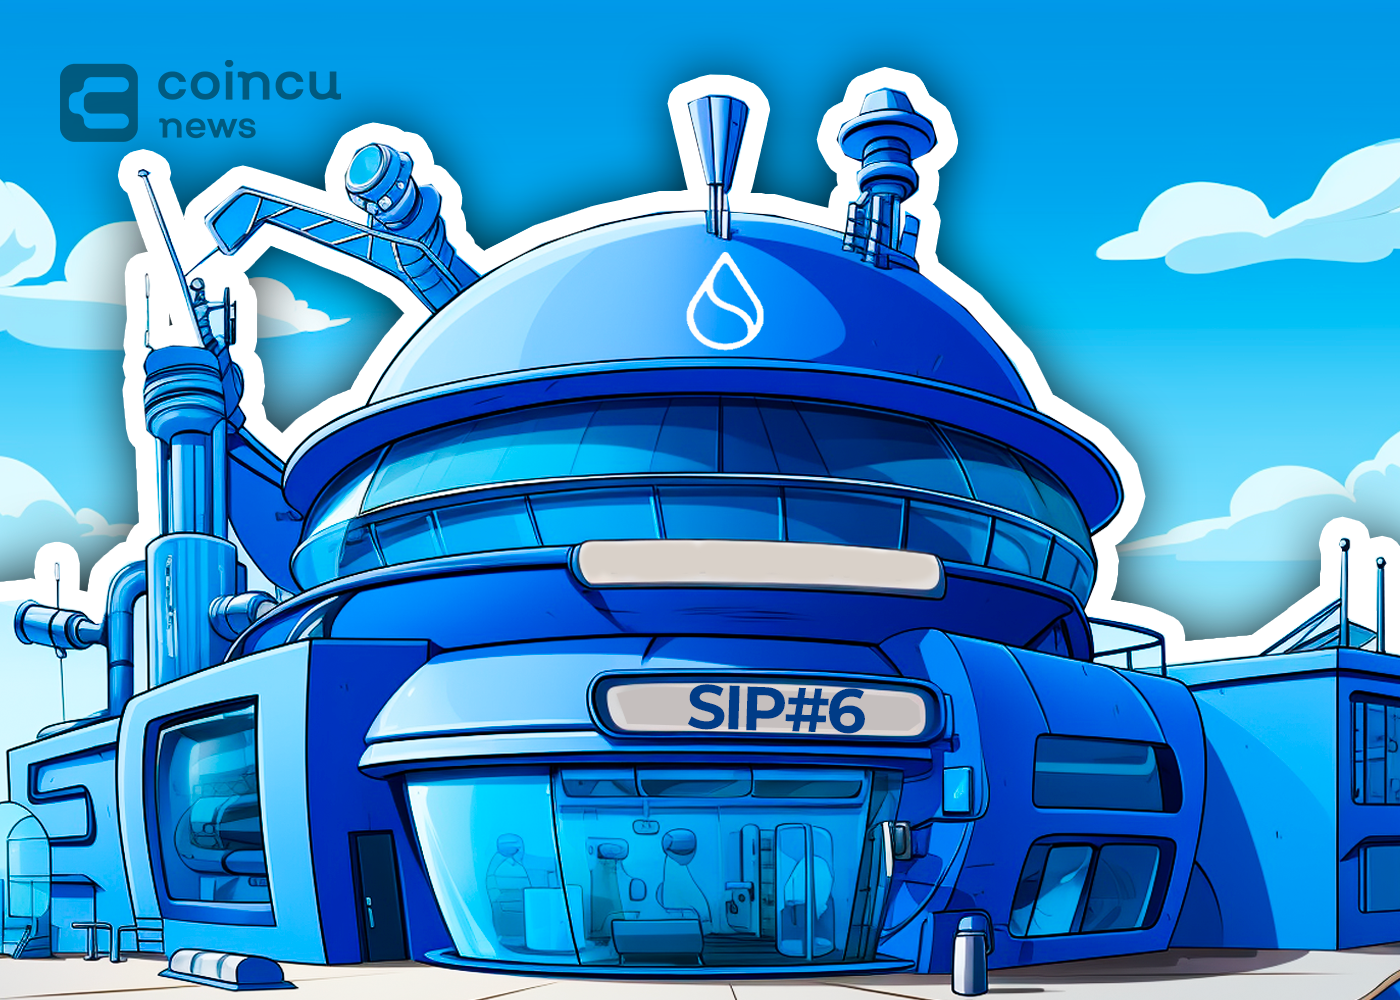 Sui allows developers to build liquid staking protocols through